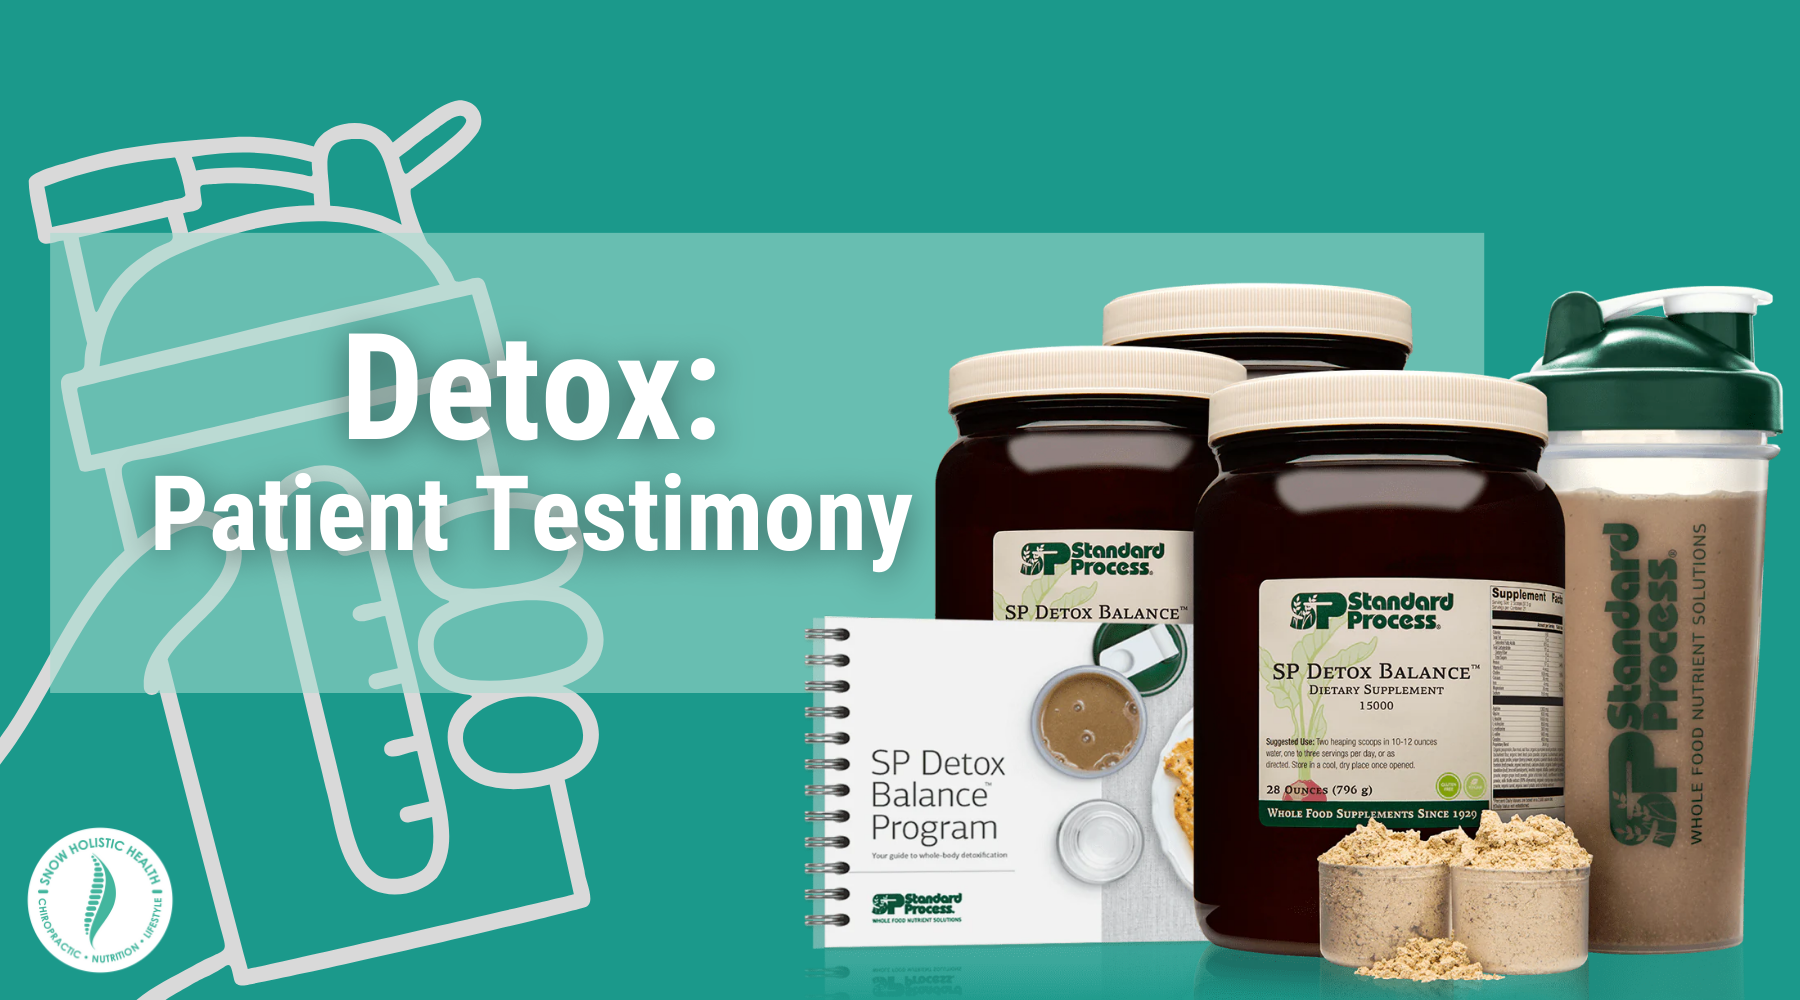 the words detox: patient testimony over an image of a hand holding a shaker bottle and the 28-day detox kit from standard process